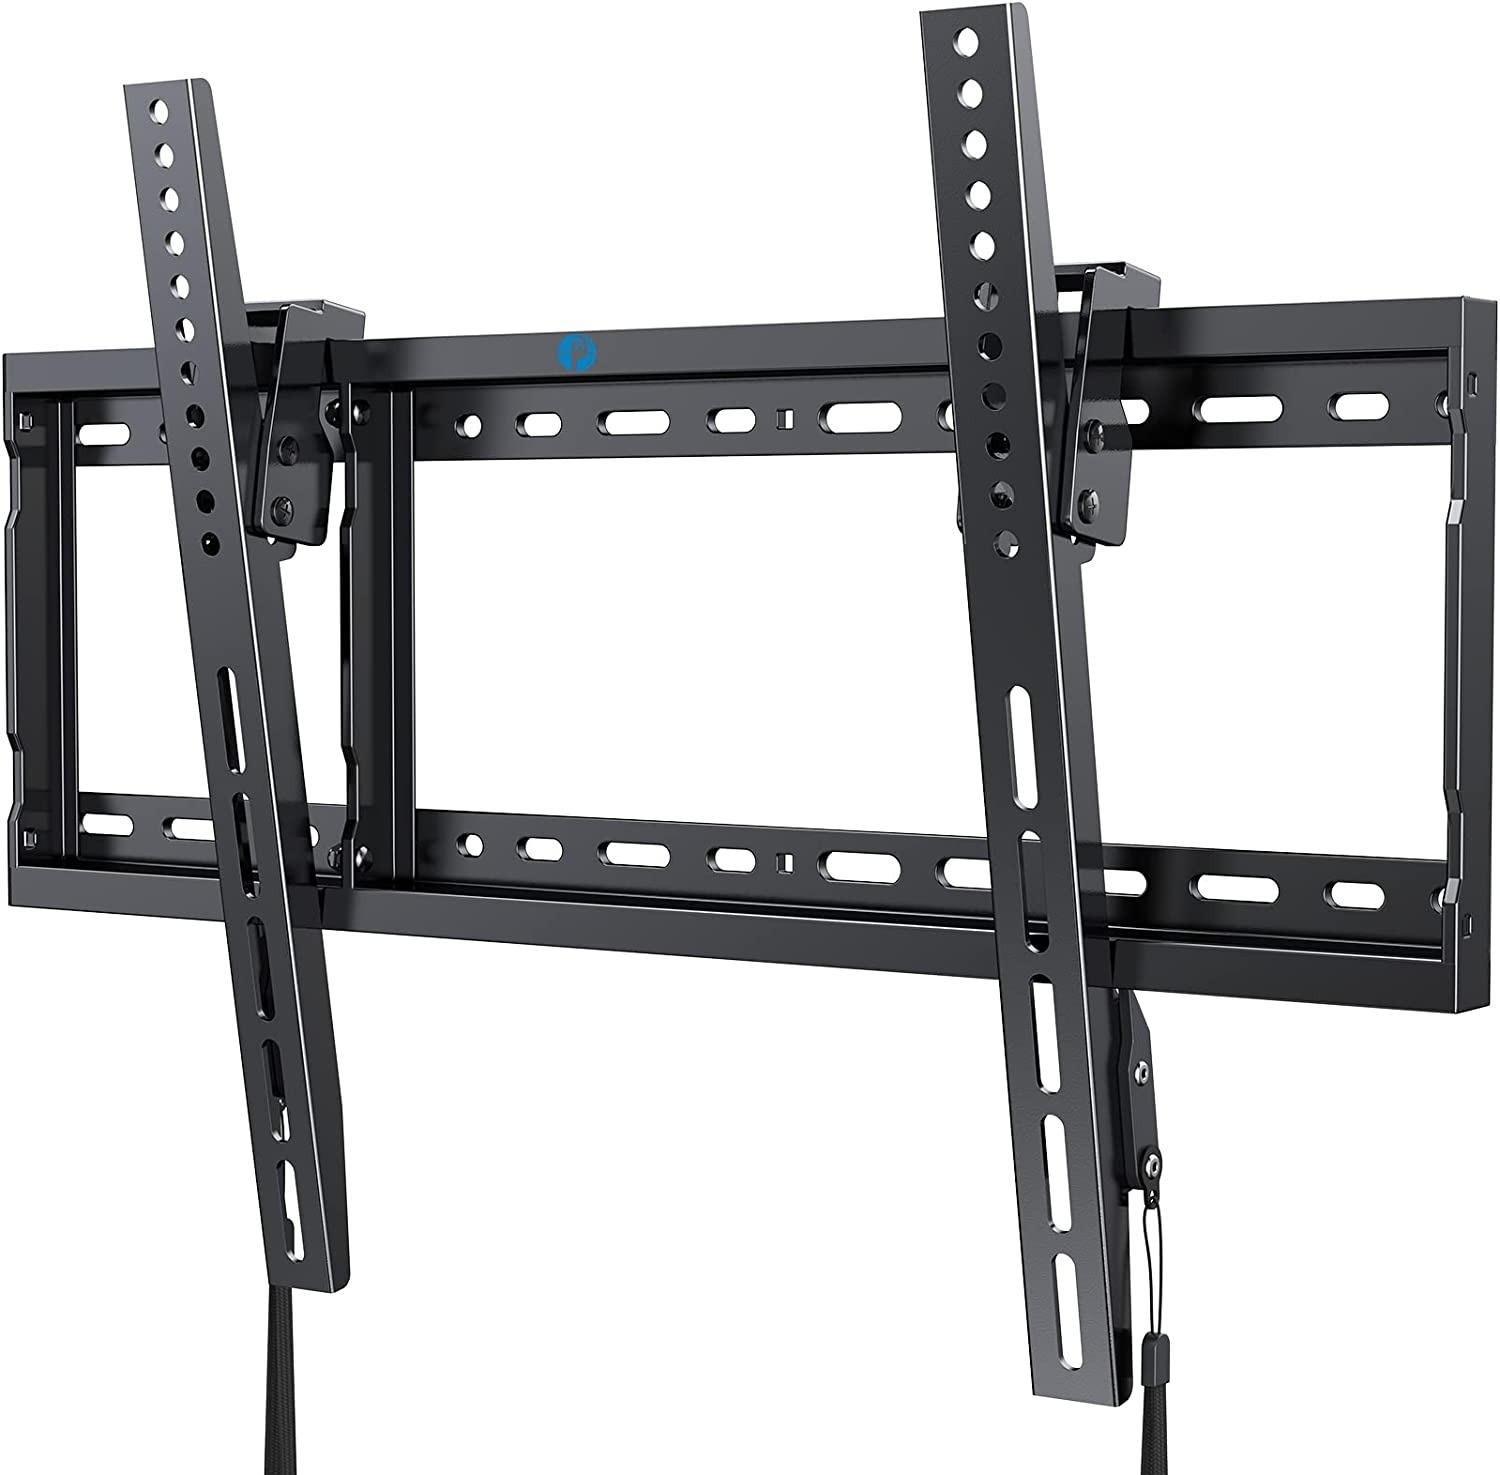 Pipishell Tilting TV Wall Mount Bracket (for 37 -75" TV's / Up to 132-lbs,) $11.80 + Free Shipping